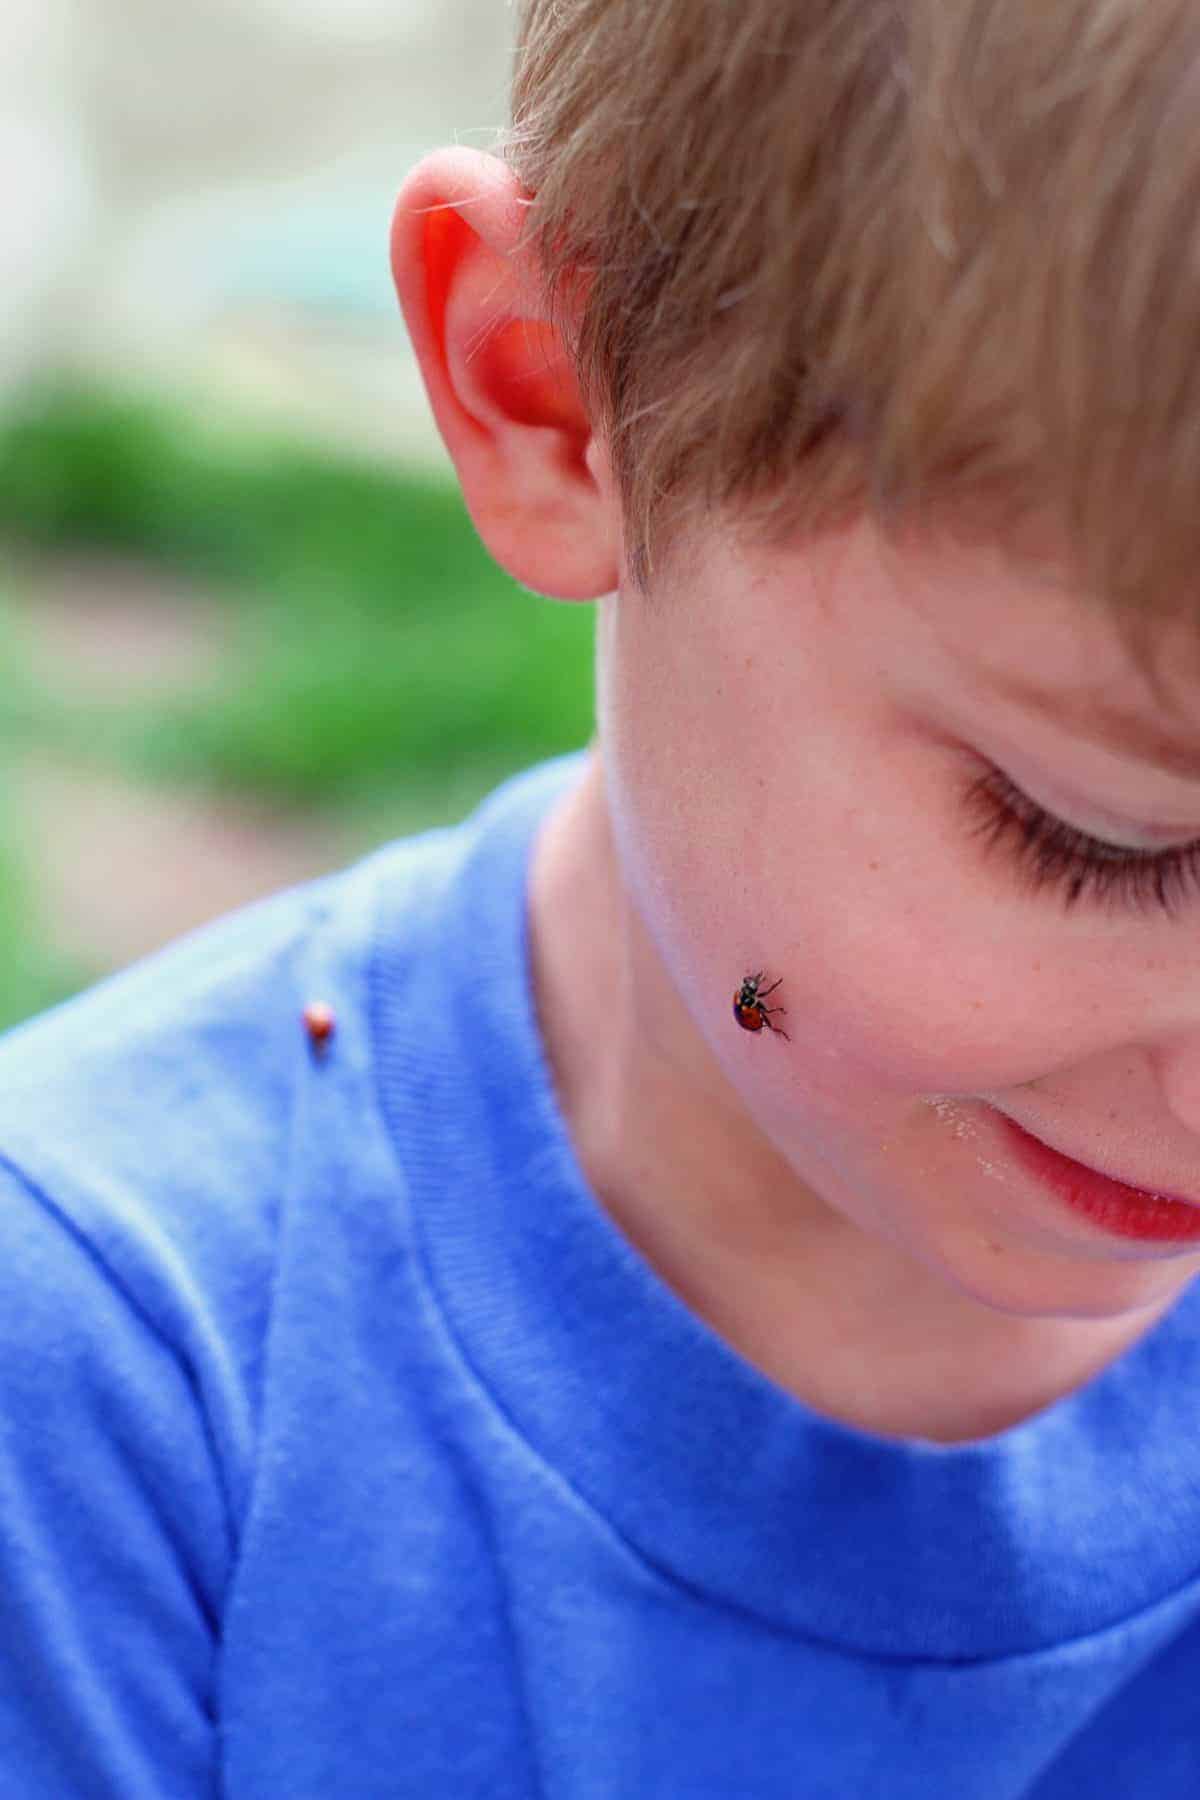 releasing ladybugs into your garden with kids